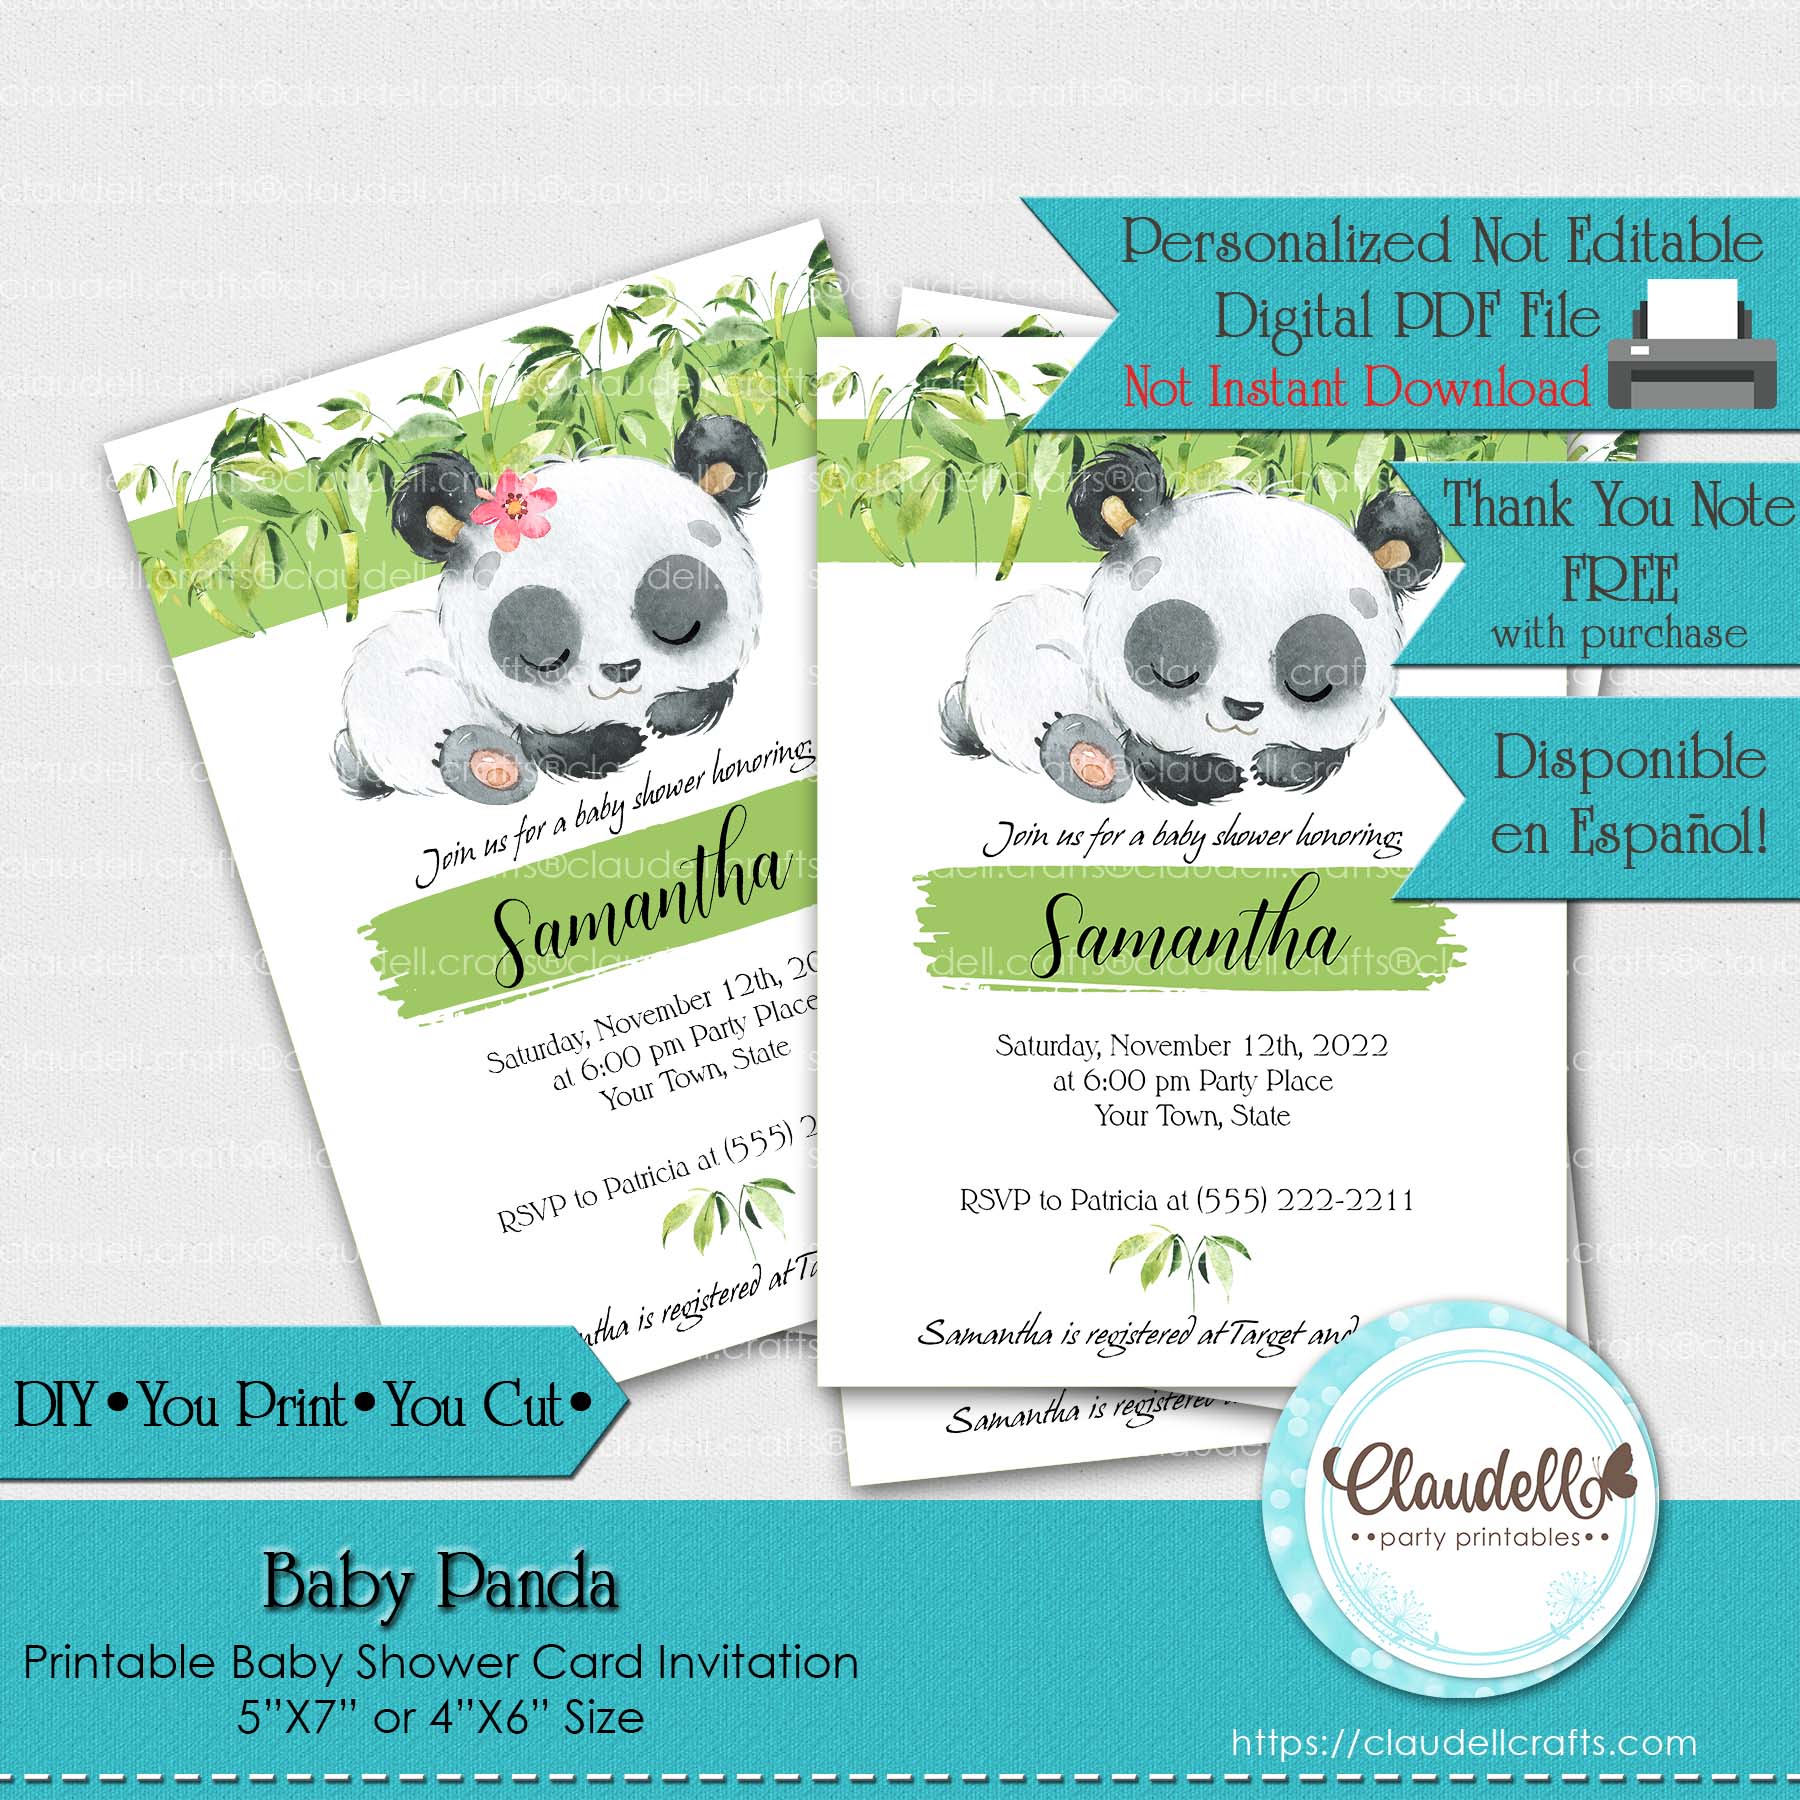 Baby Panda Baby Shower Invitation Card, Baby Shower Jungle/Digital File Only